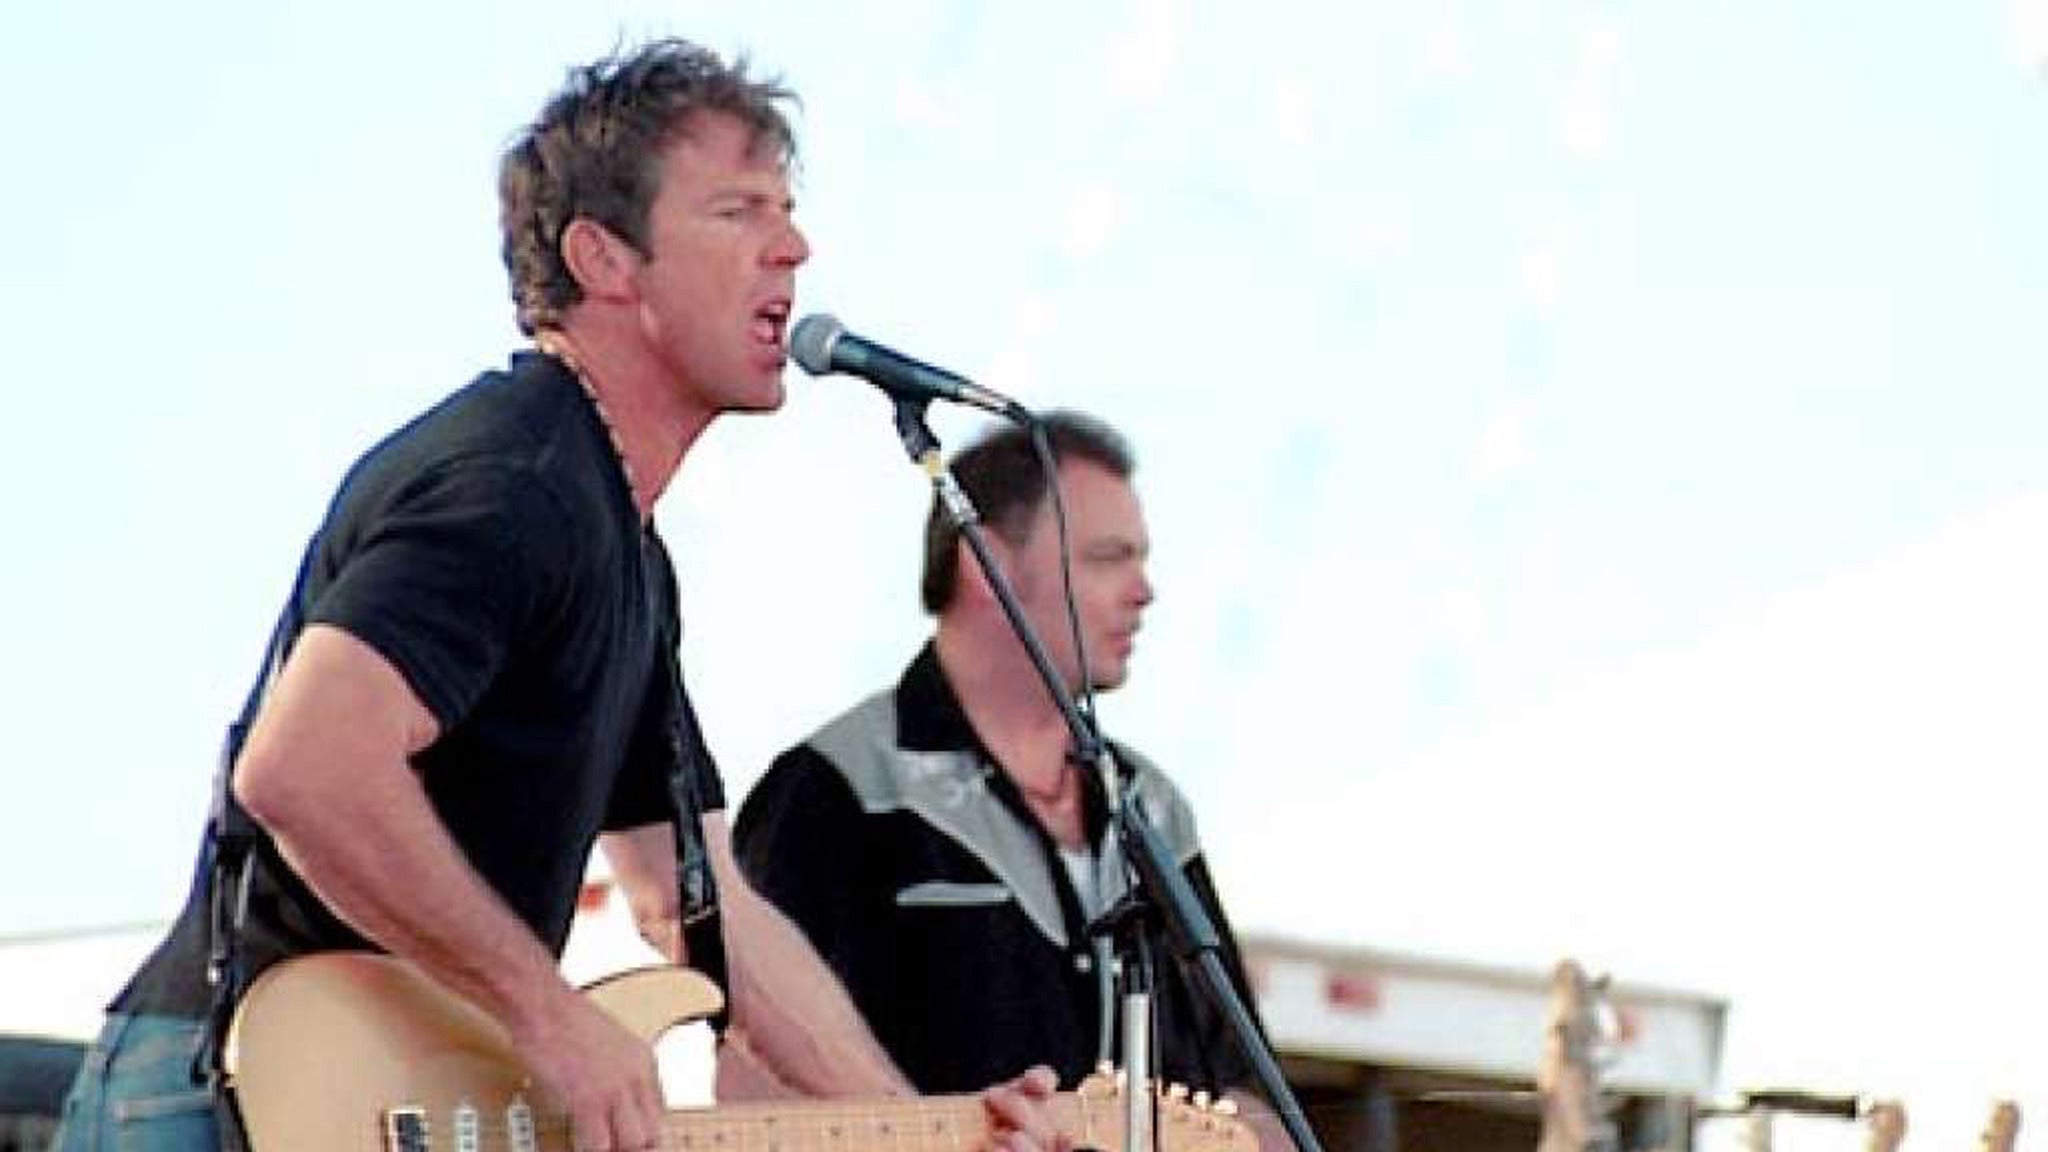 Dennis Quaid and the Sharks in North Las Vegas promo photo for Ticketmaster presale offer code